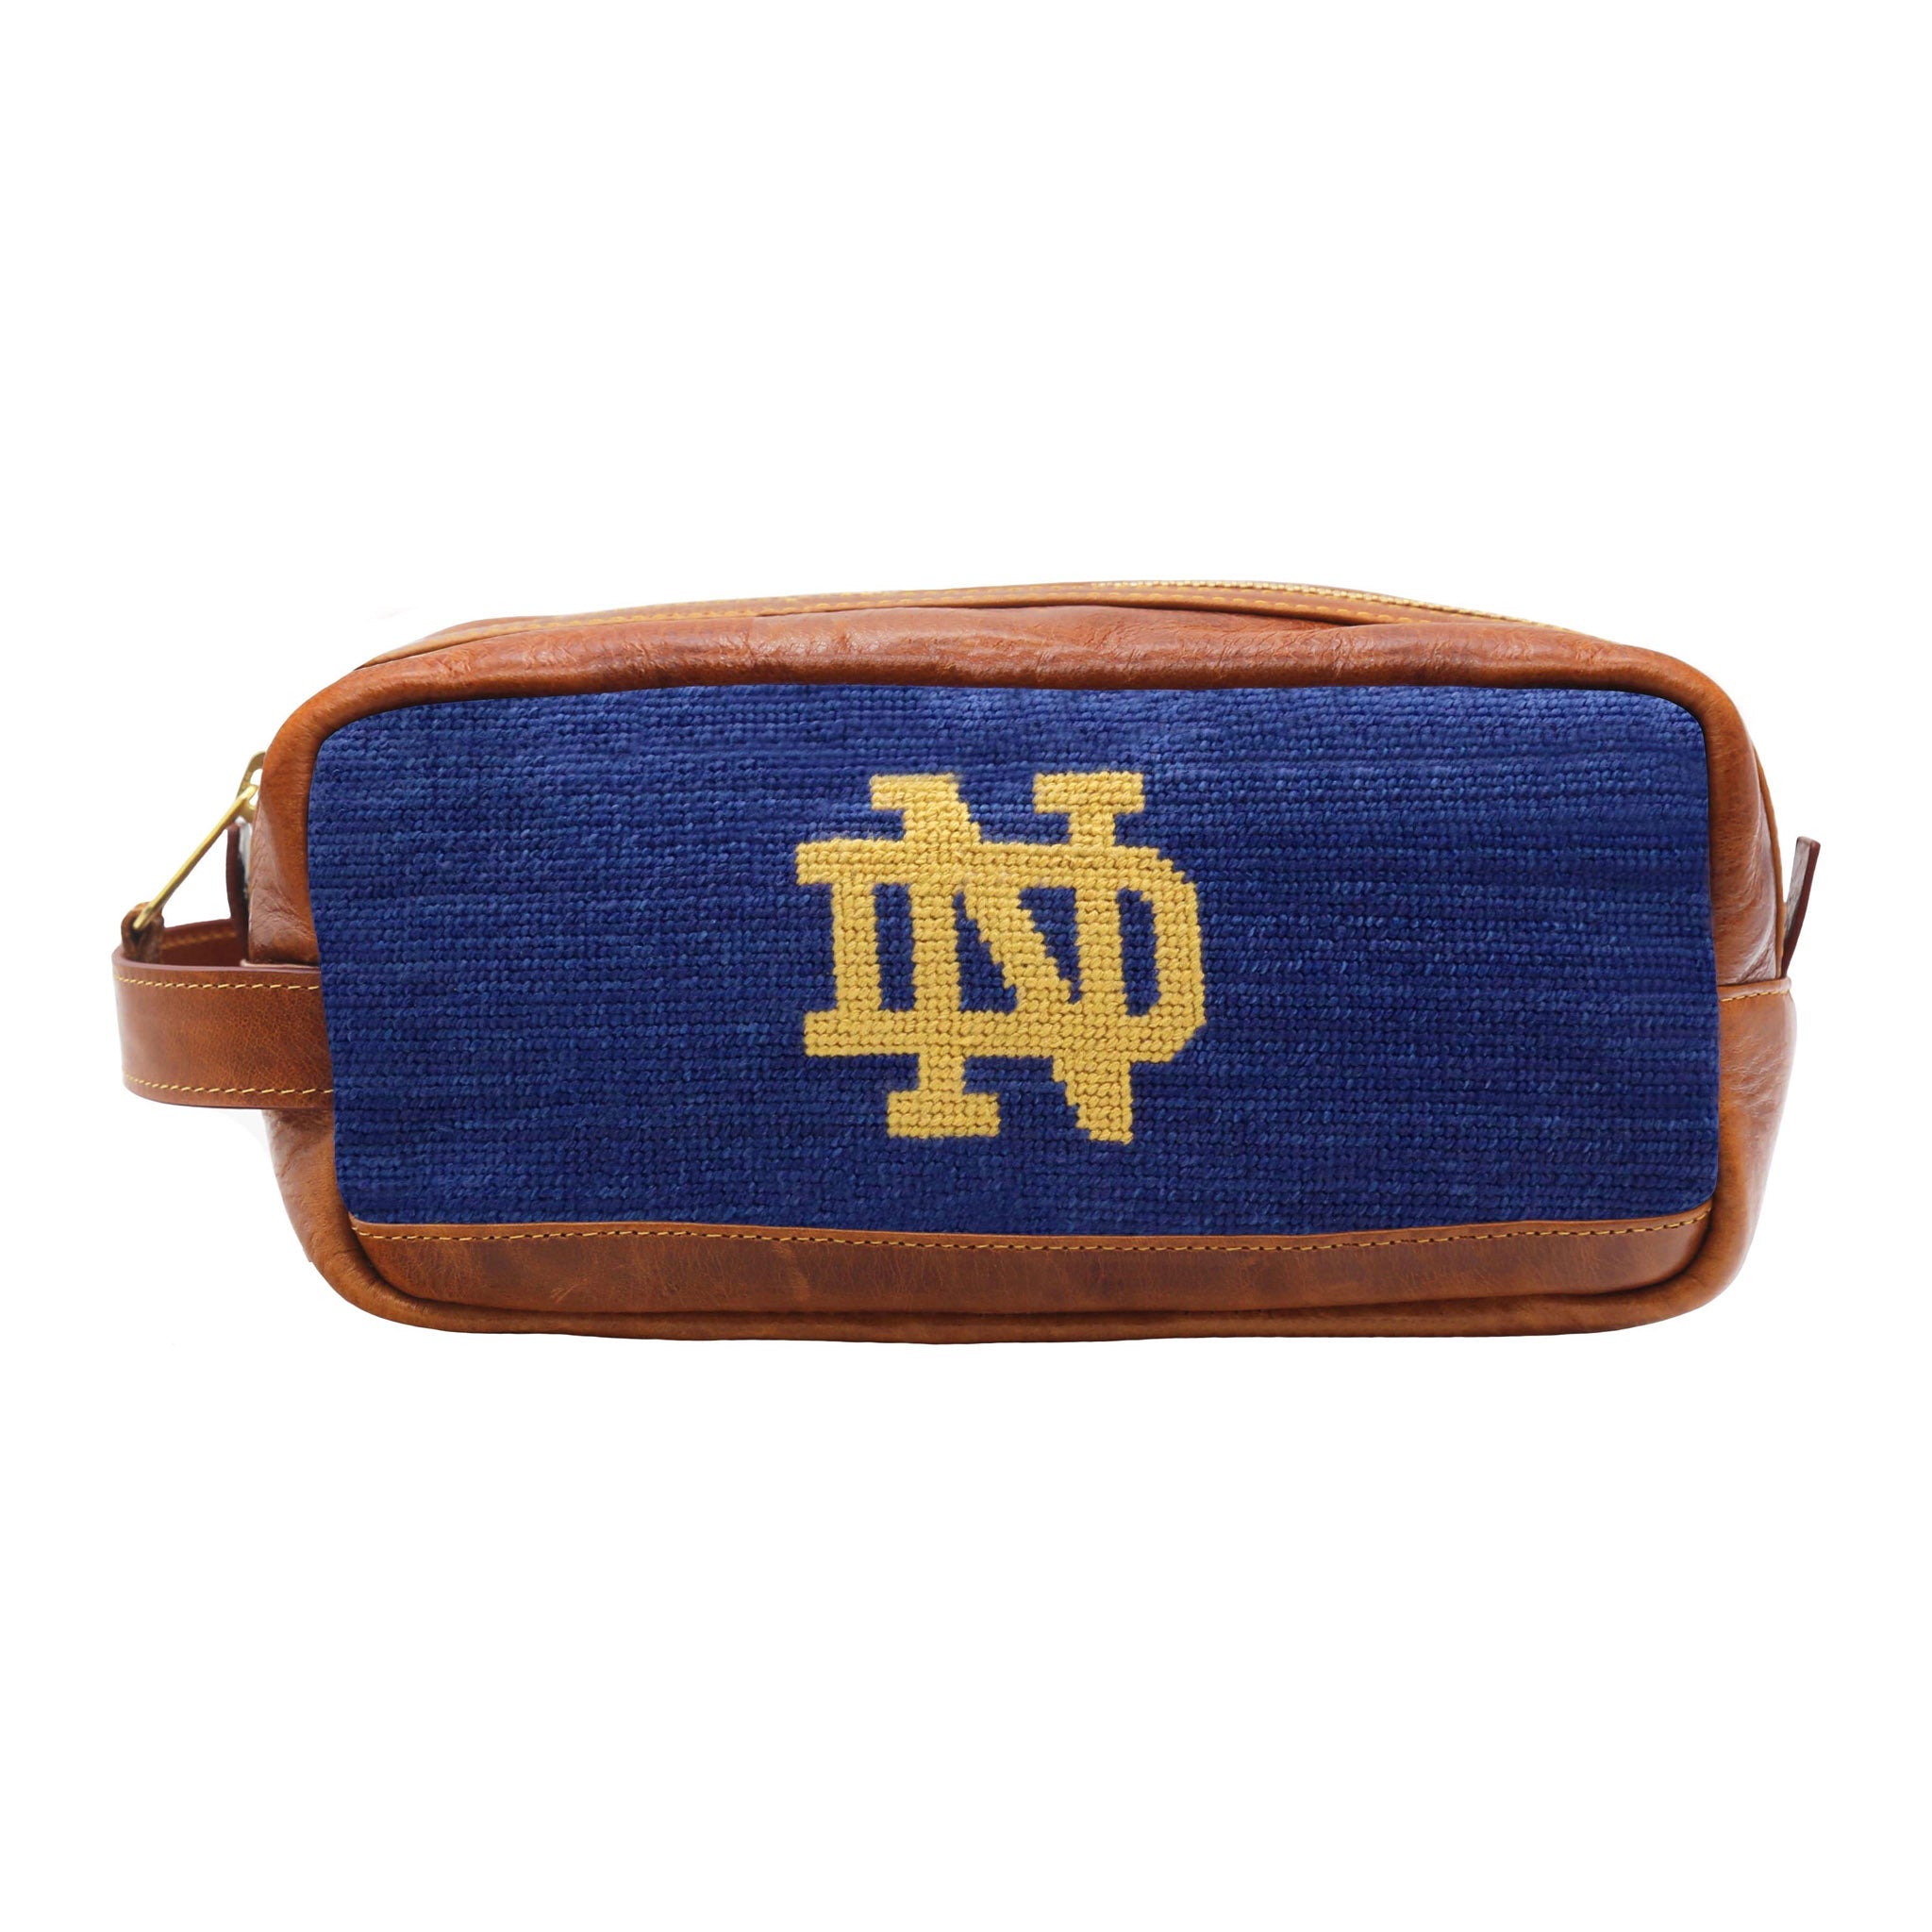 Monogrammed Notre Dame ND Toiletry Bag (Classic Navy)